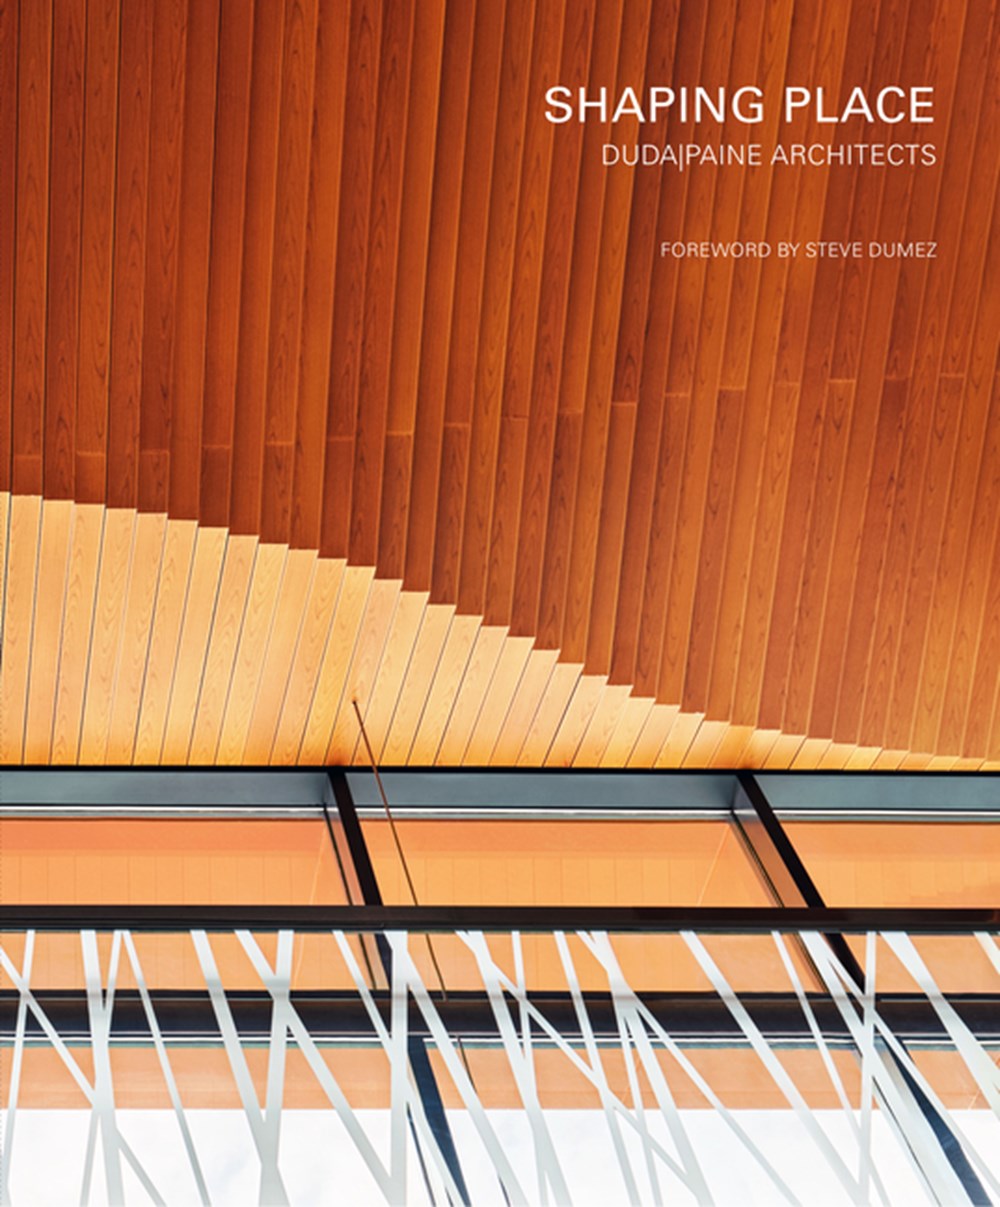 Shaping Place: Dudapaine Architects